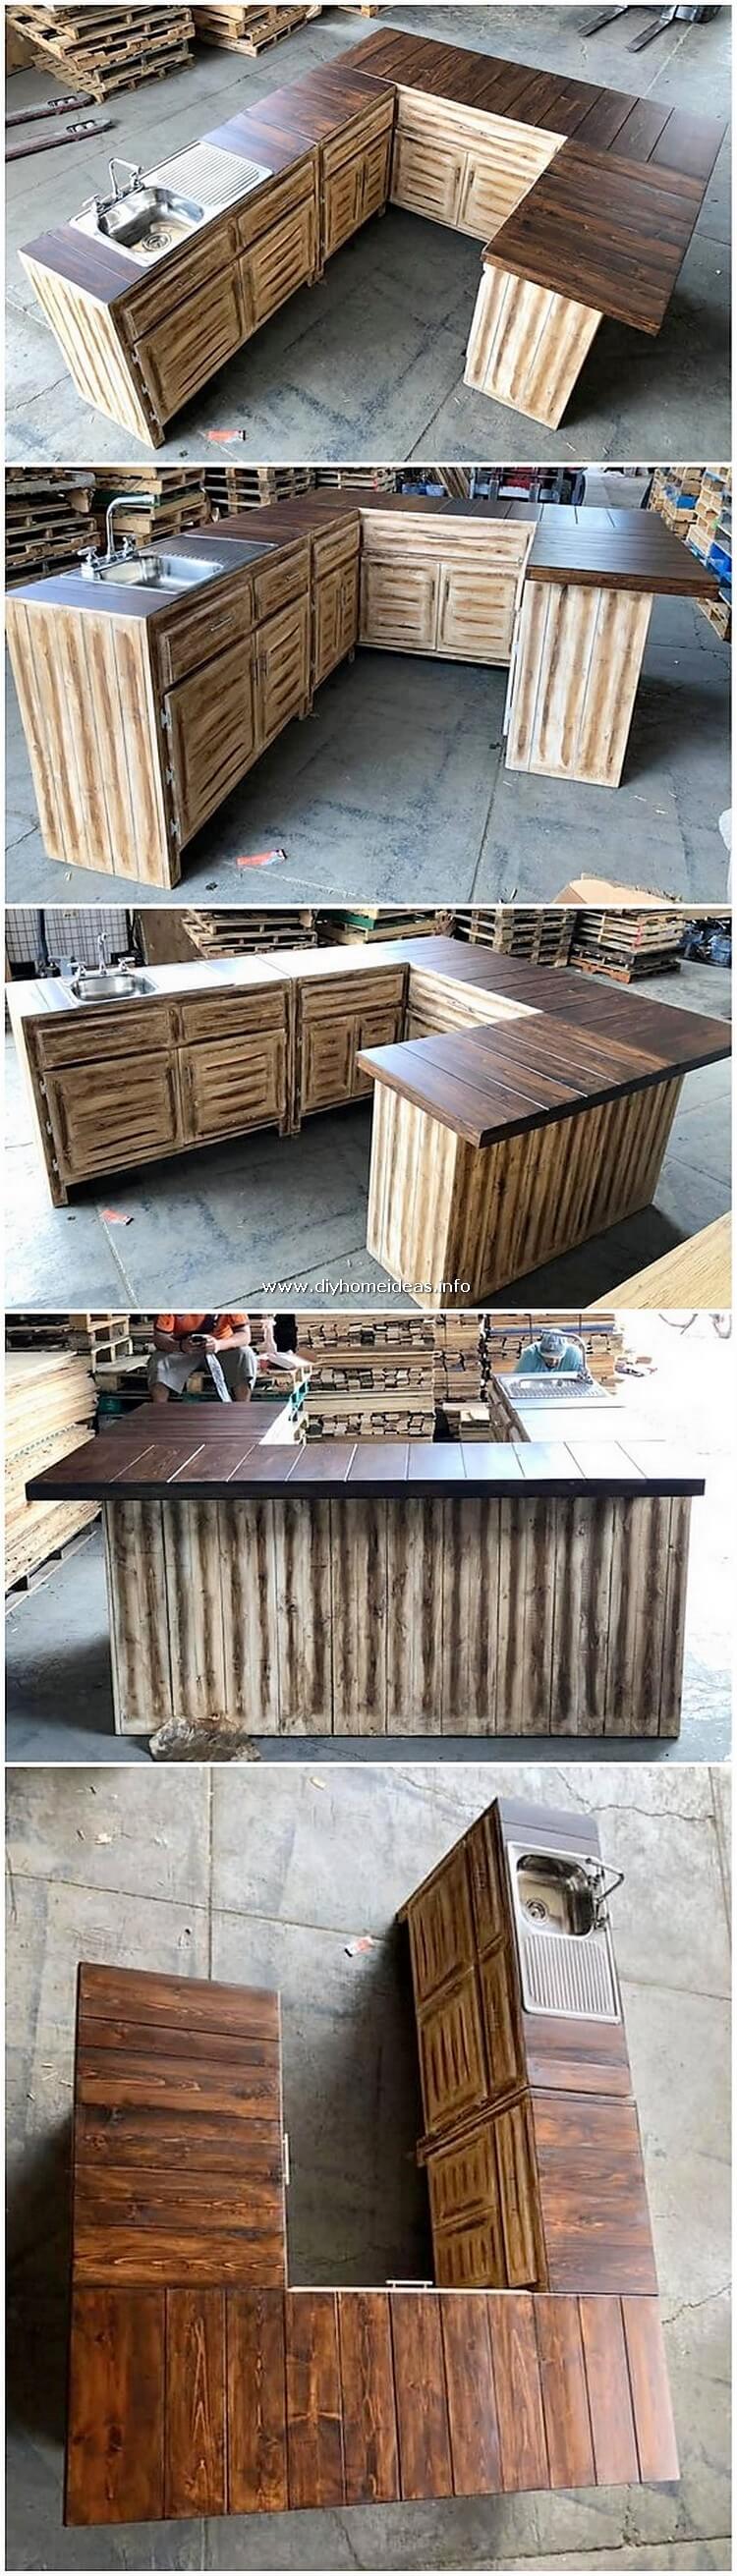 Elegant and Creative Ideas with Old Pallets | DIY Home Ideas